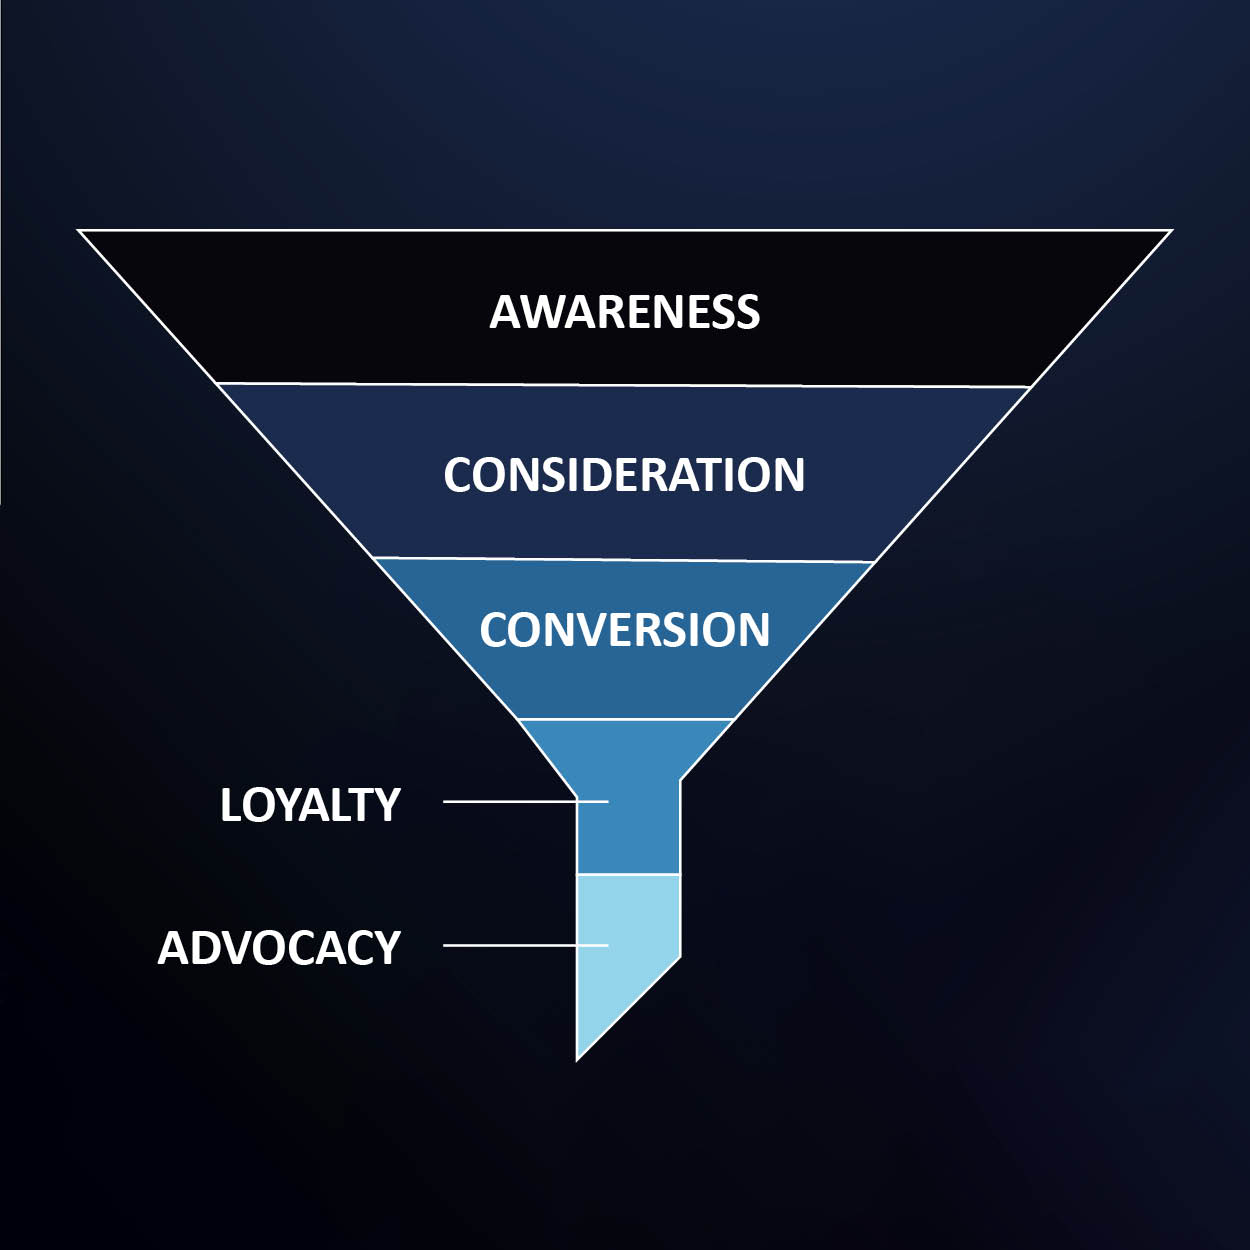 Customer funnel: 1. Awareness 2. Consideration 3. Conversion 4. Loyalty 5. Advocacy